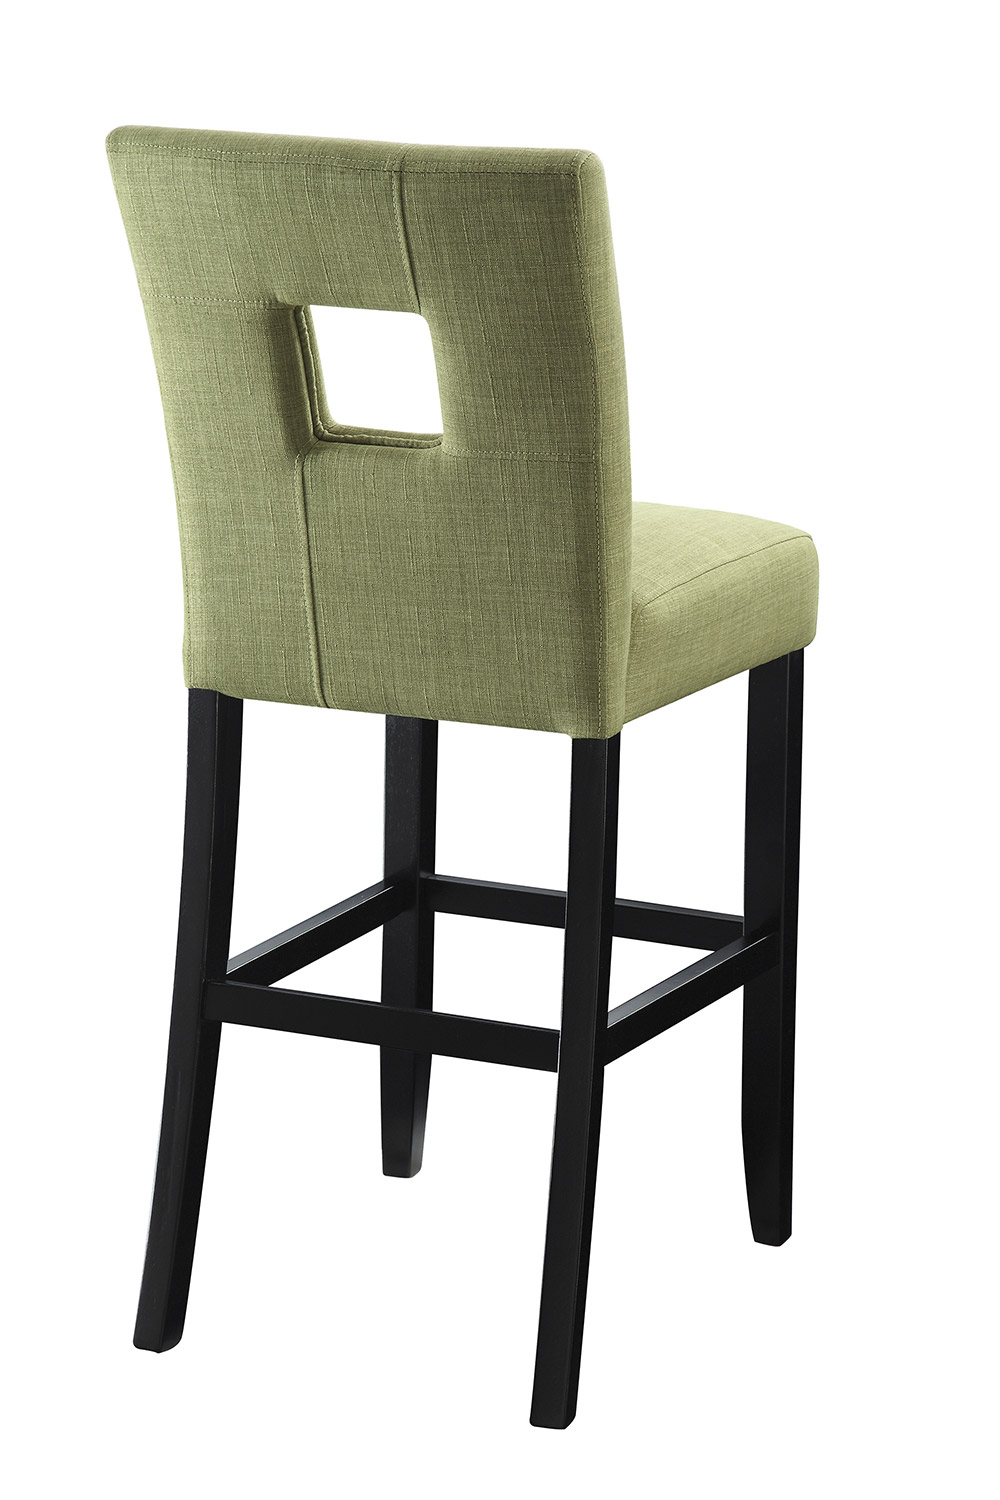 Coaster Andenne Counter Height Chair - Green/Black